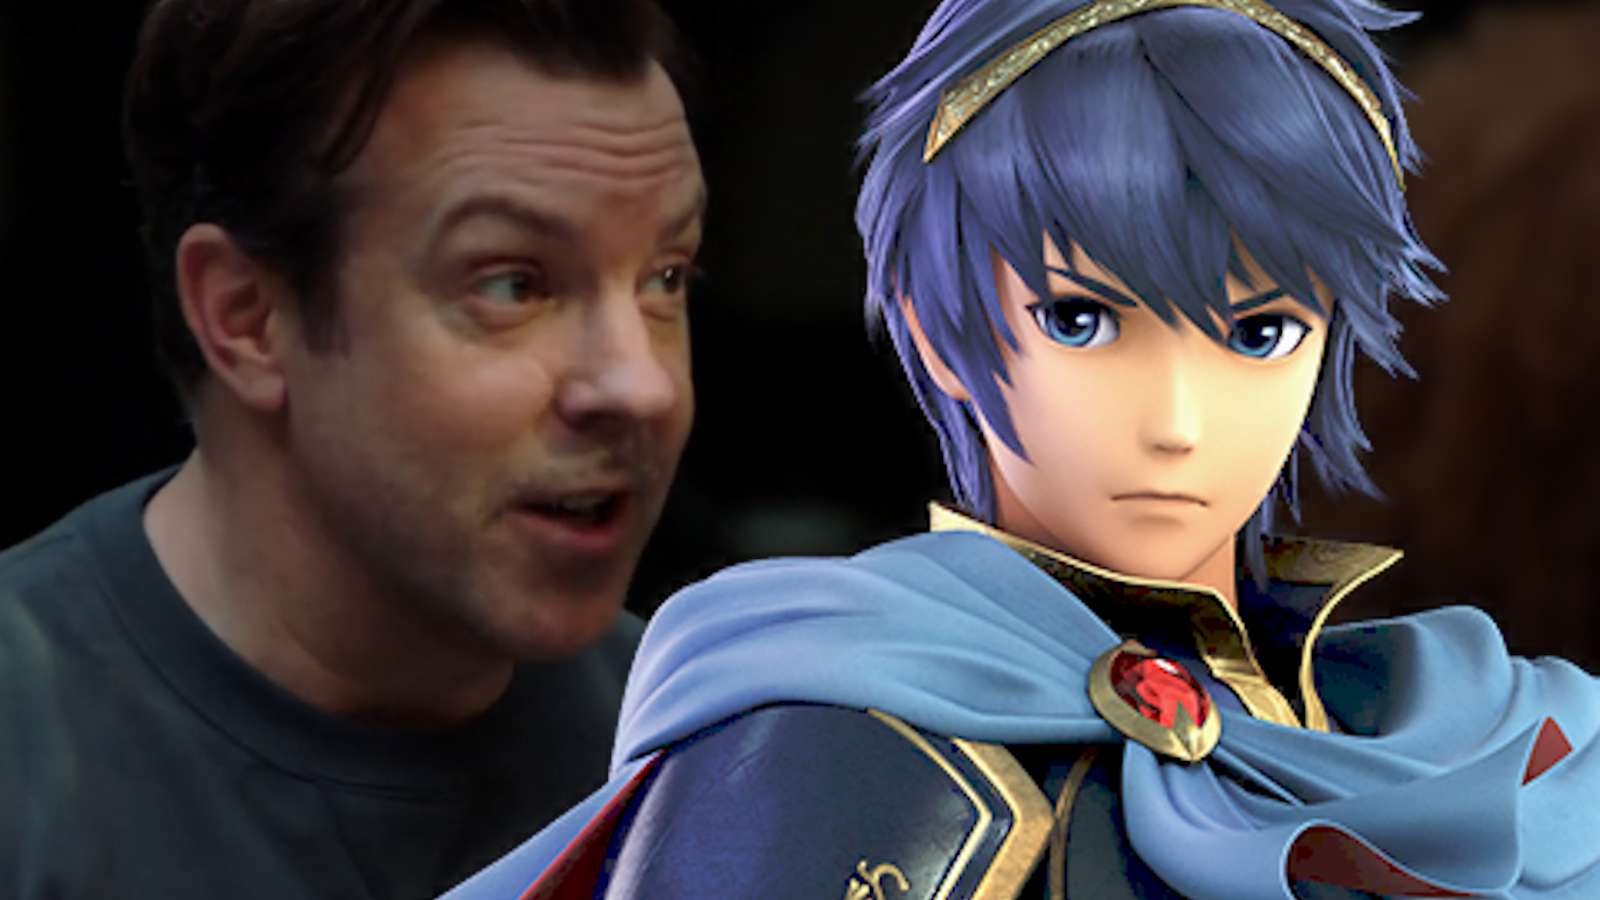 jason Sudeikis with marth from smash bros